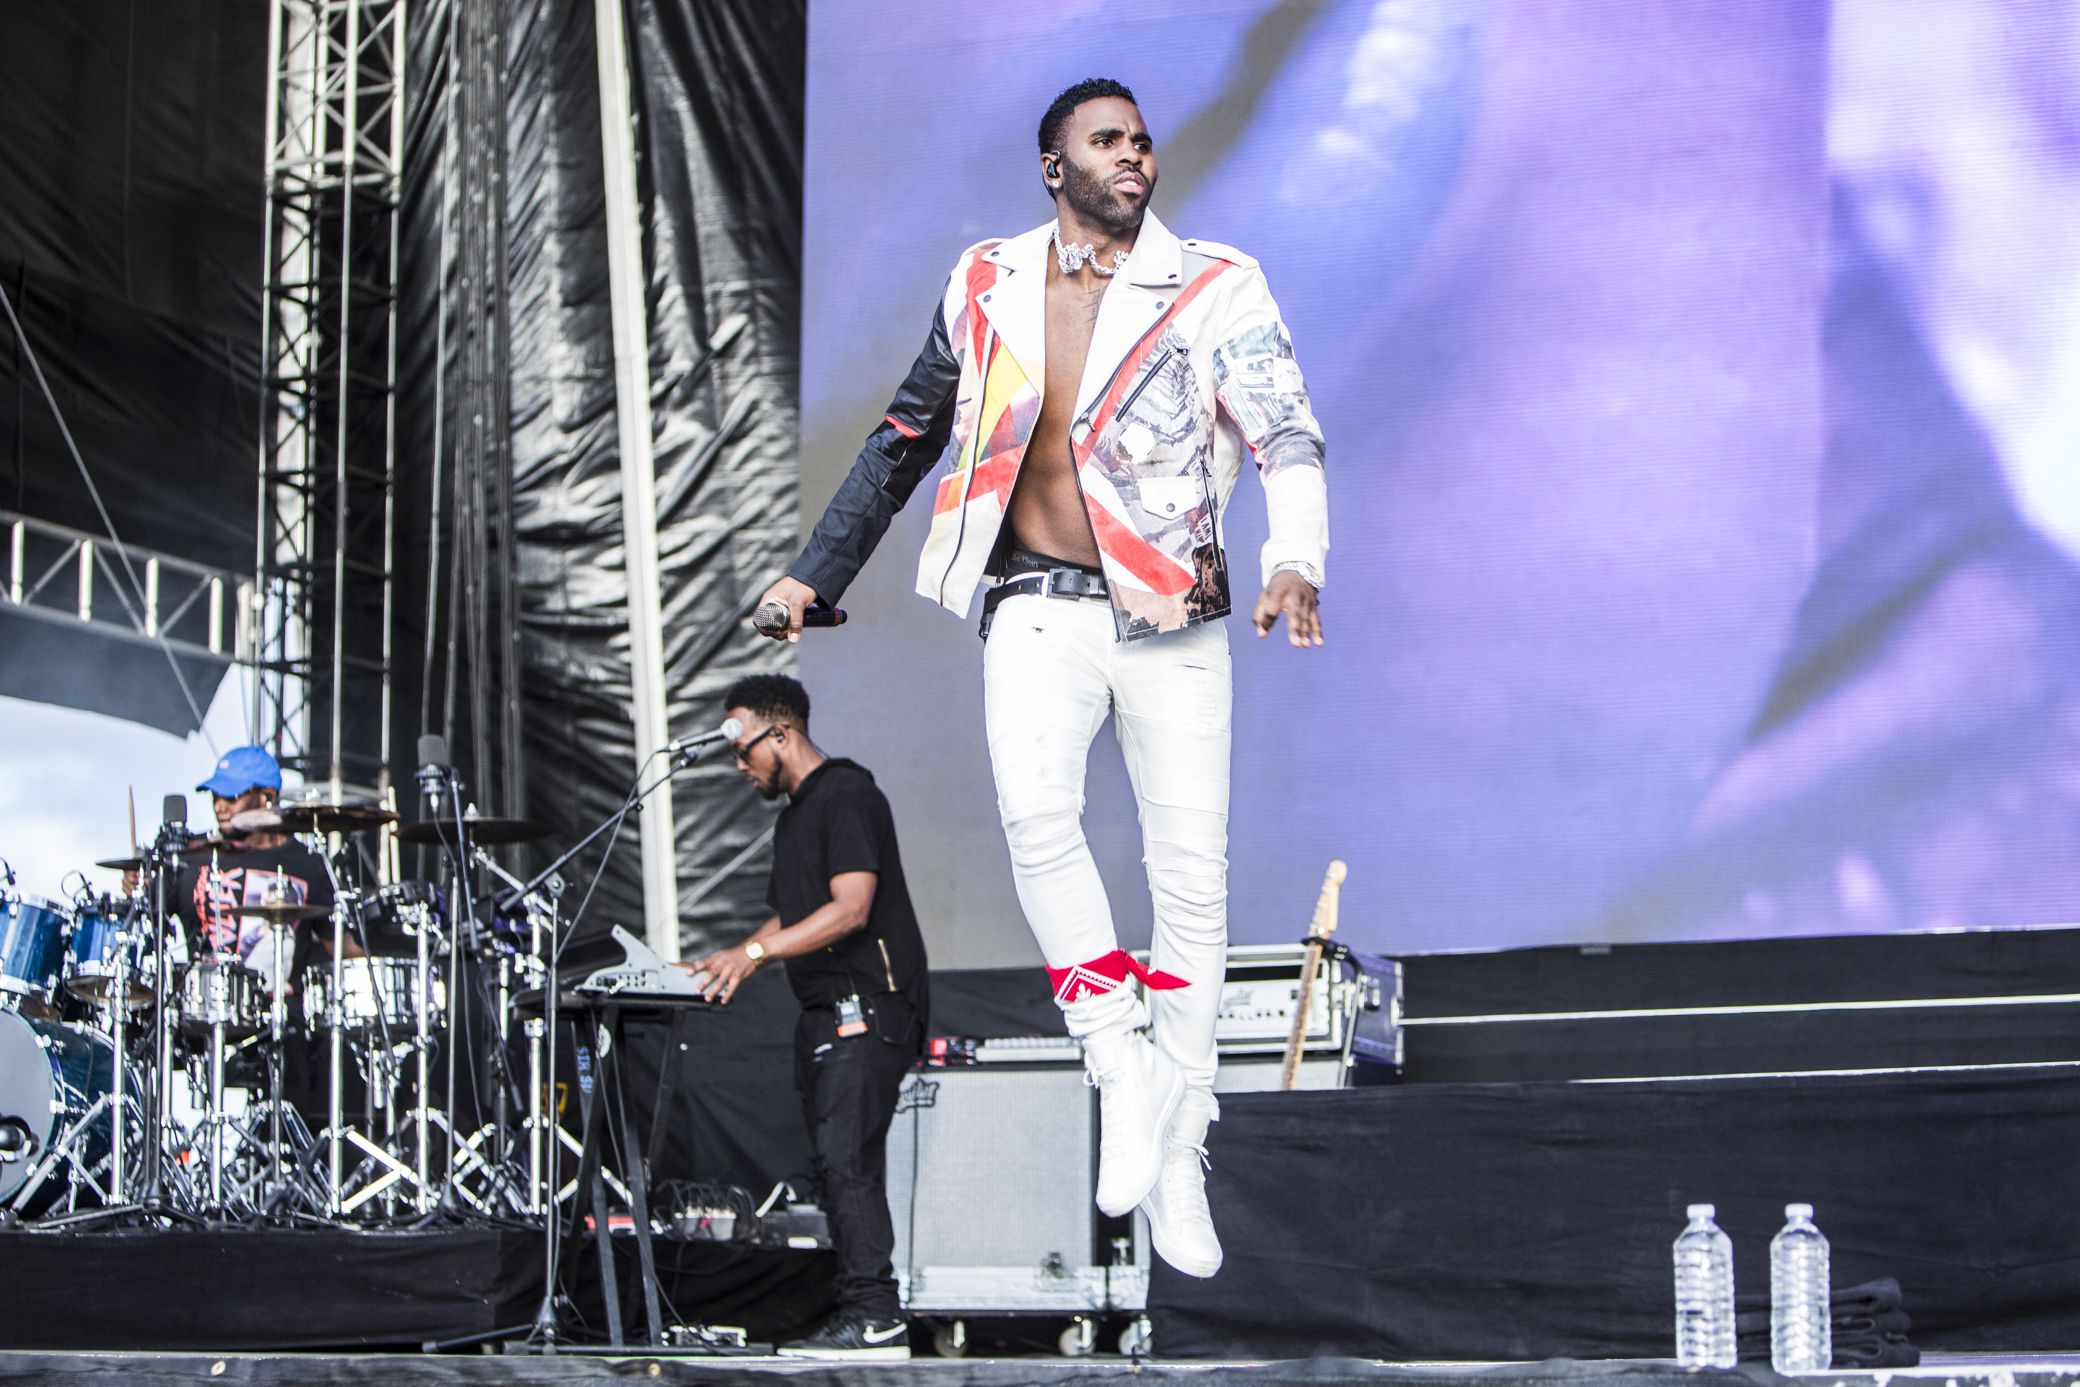 jason derulo 5 KAABOO Del Mar Succeeds at Being a Festival for Everyone